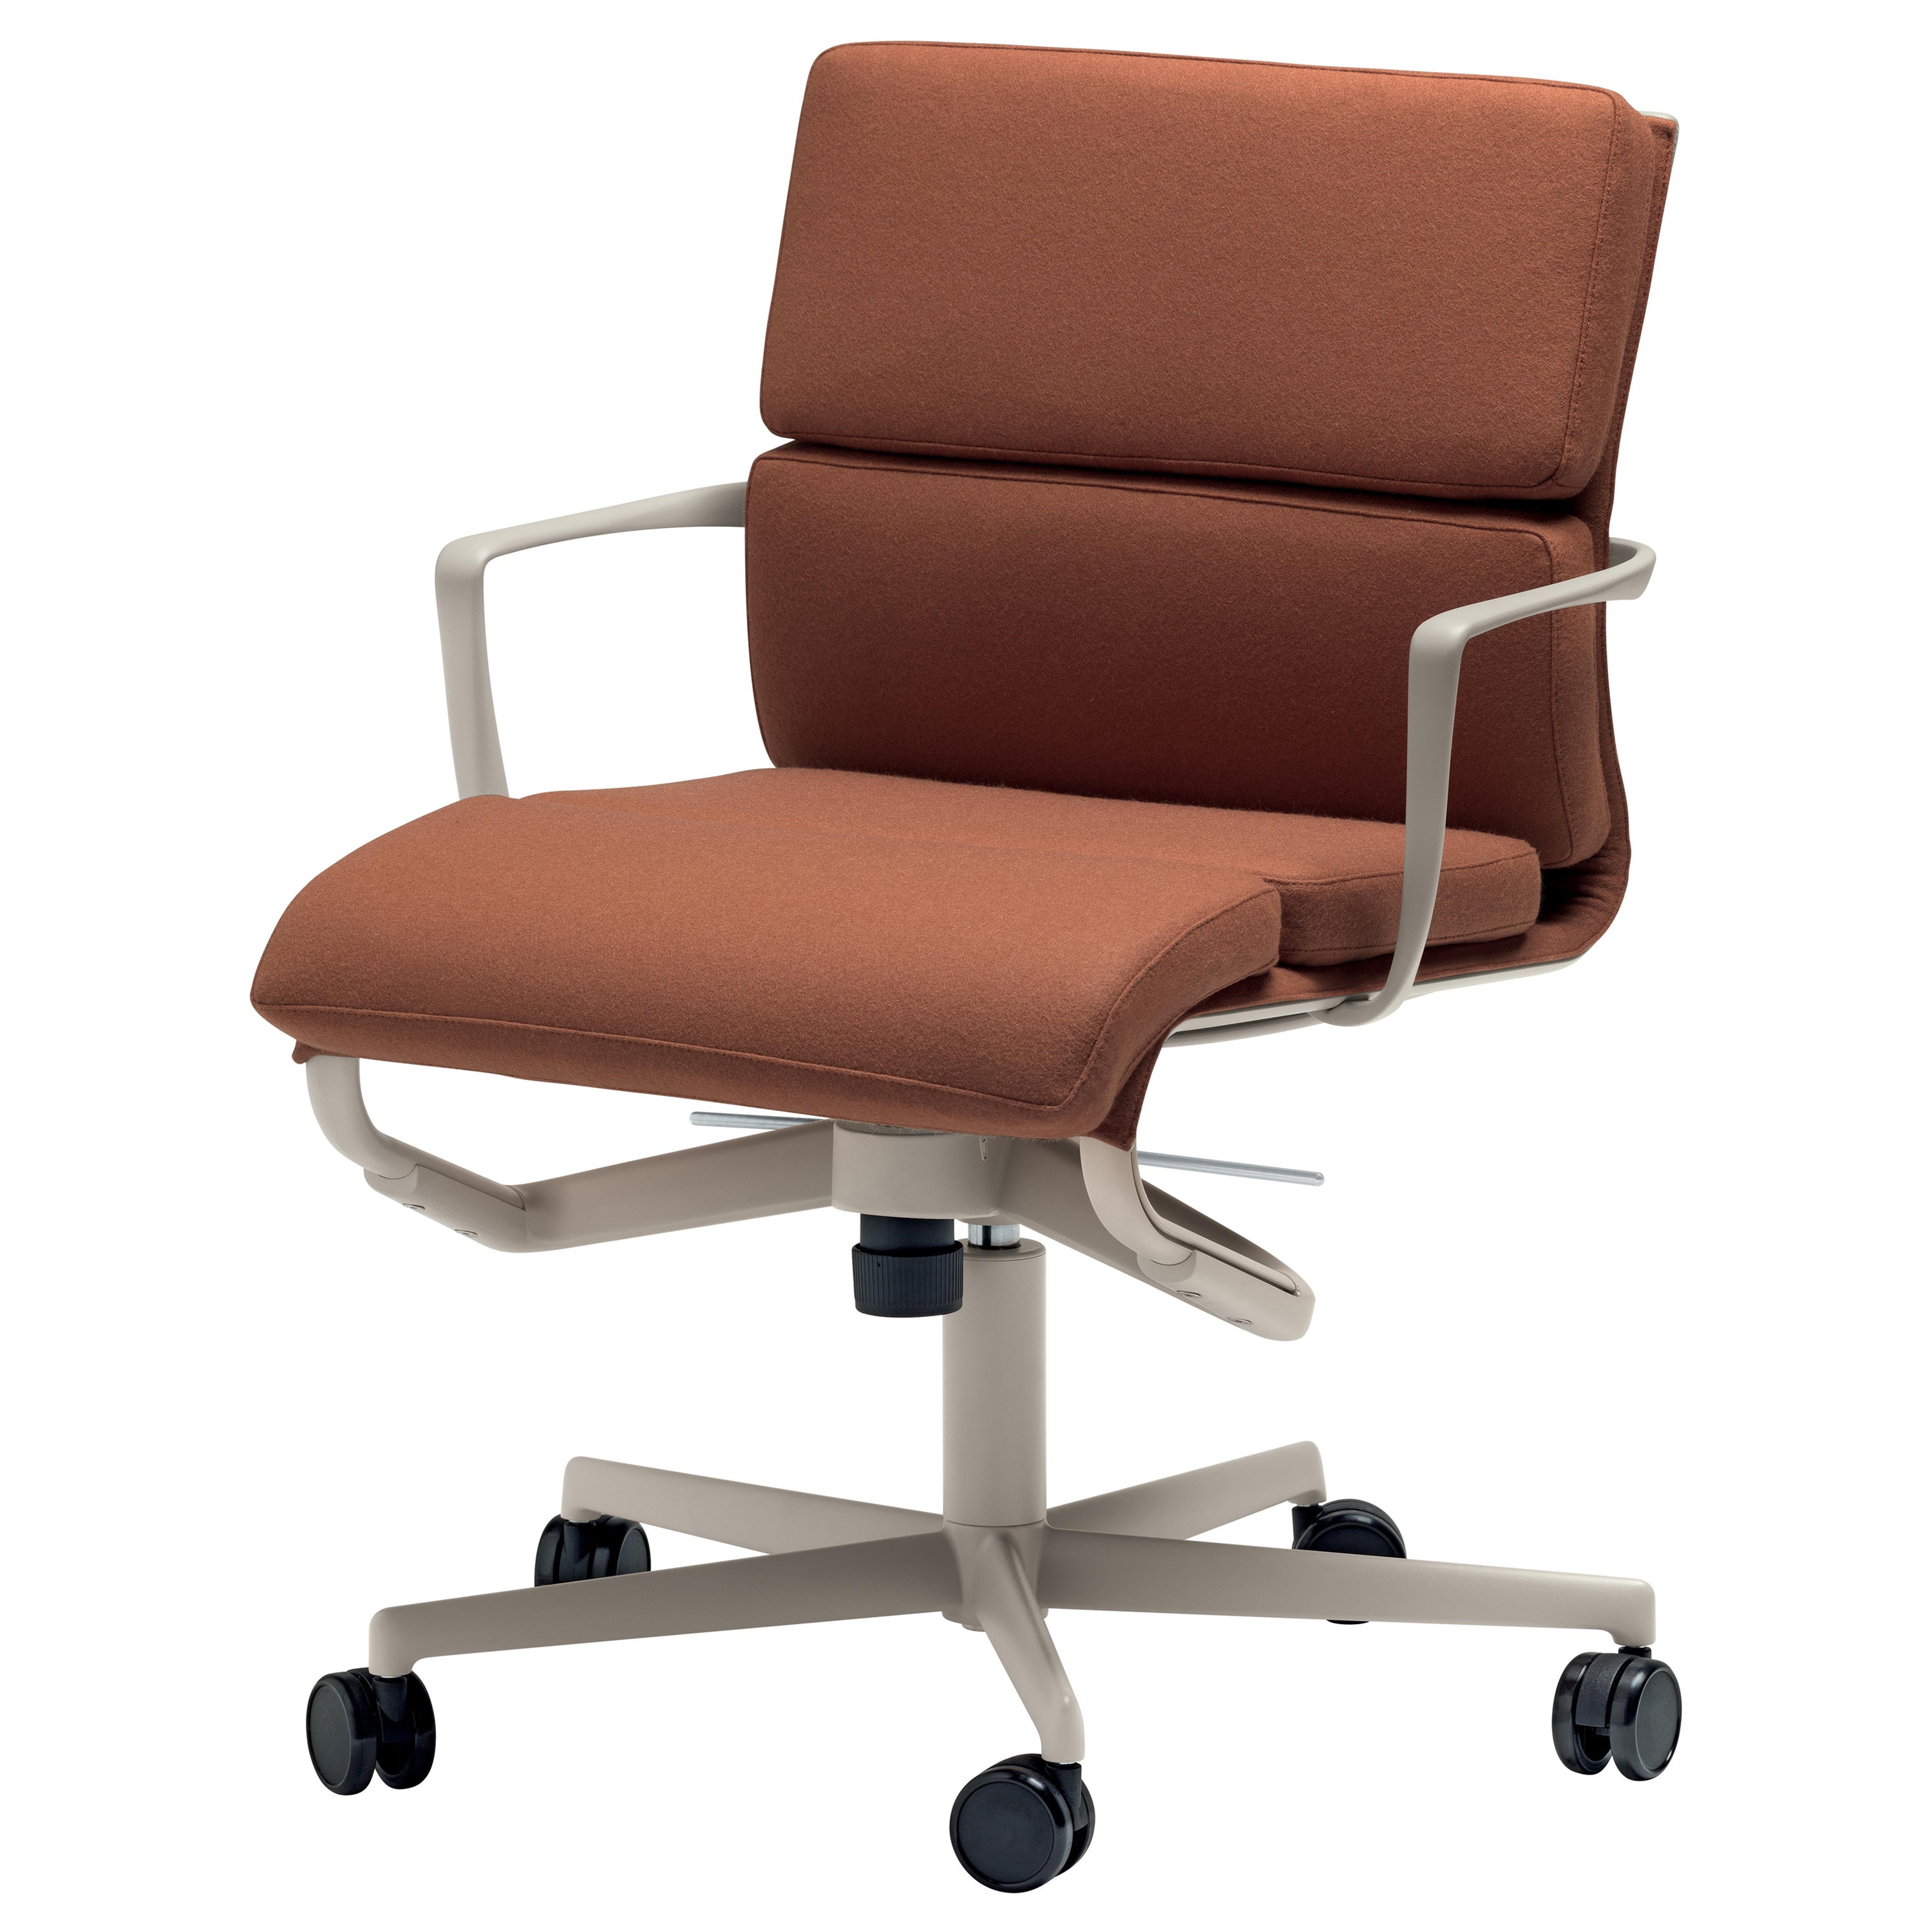 Alias Rollingframe Chair 52 Soft in Brown Upholstery with Sand Aluminium Frame